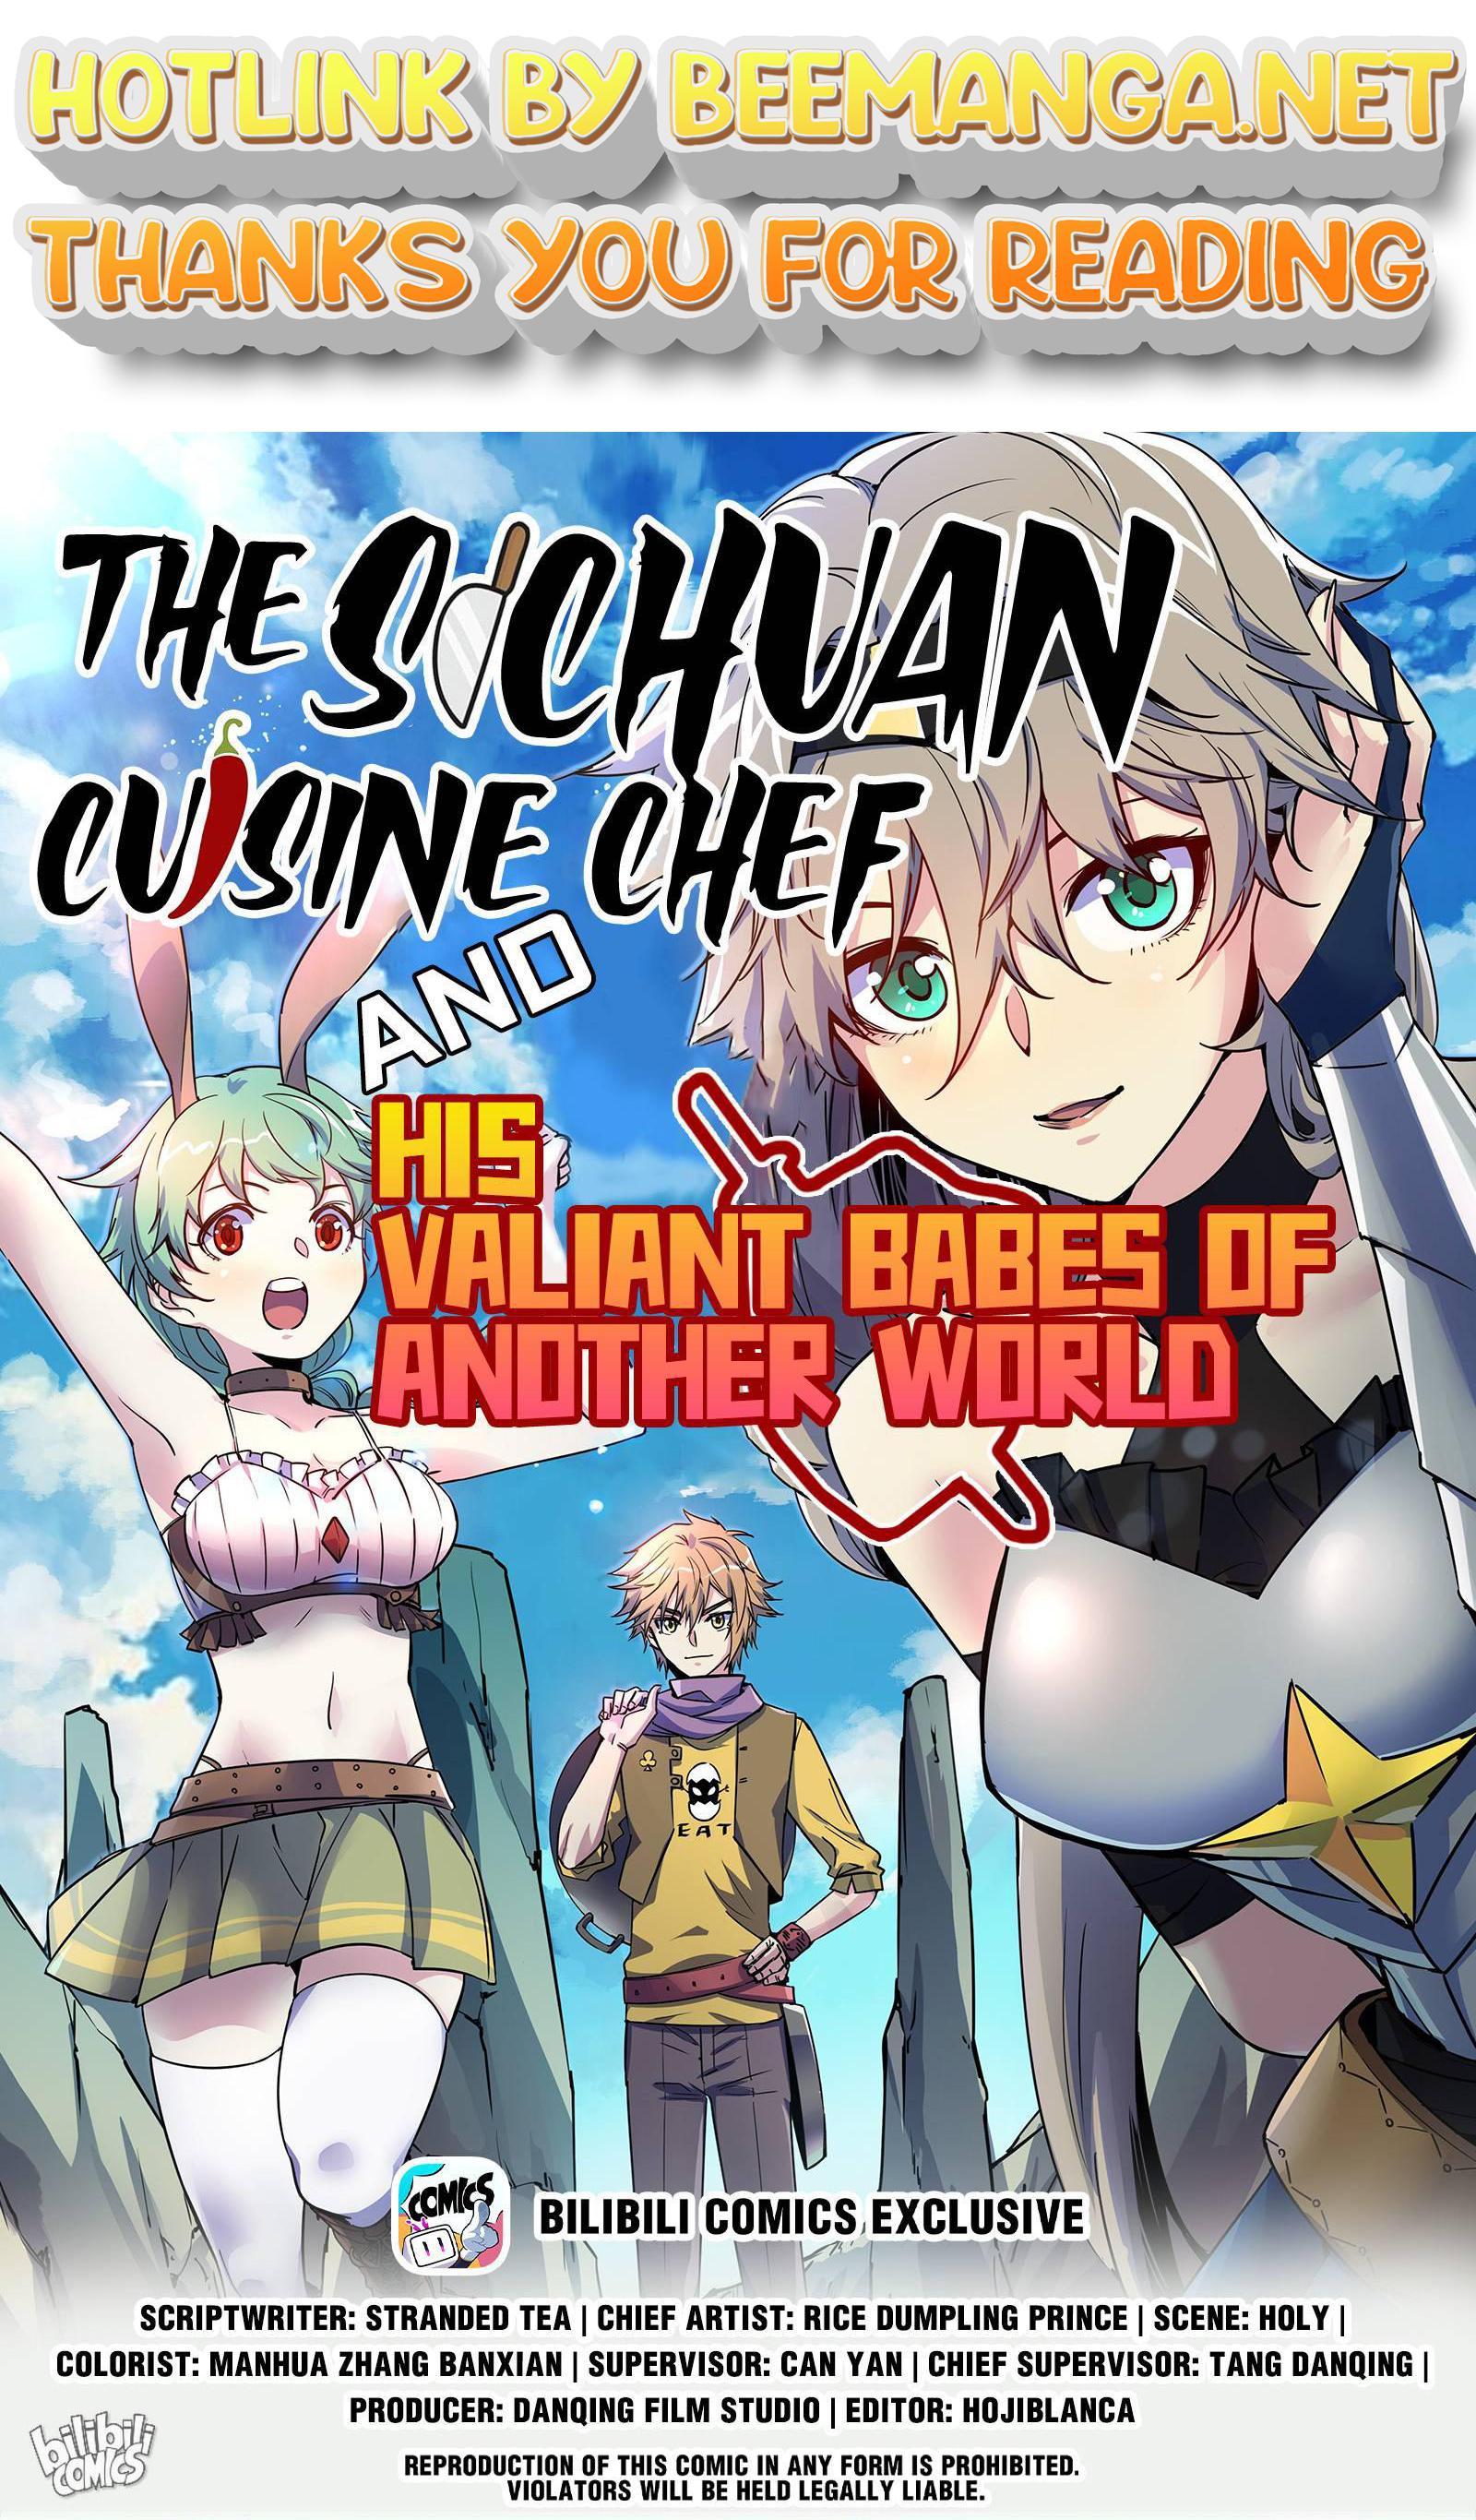 The Sichuan Cuisine Chef And His Valiant Babes Of Another World Chapter 28 - page 1